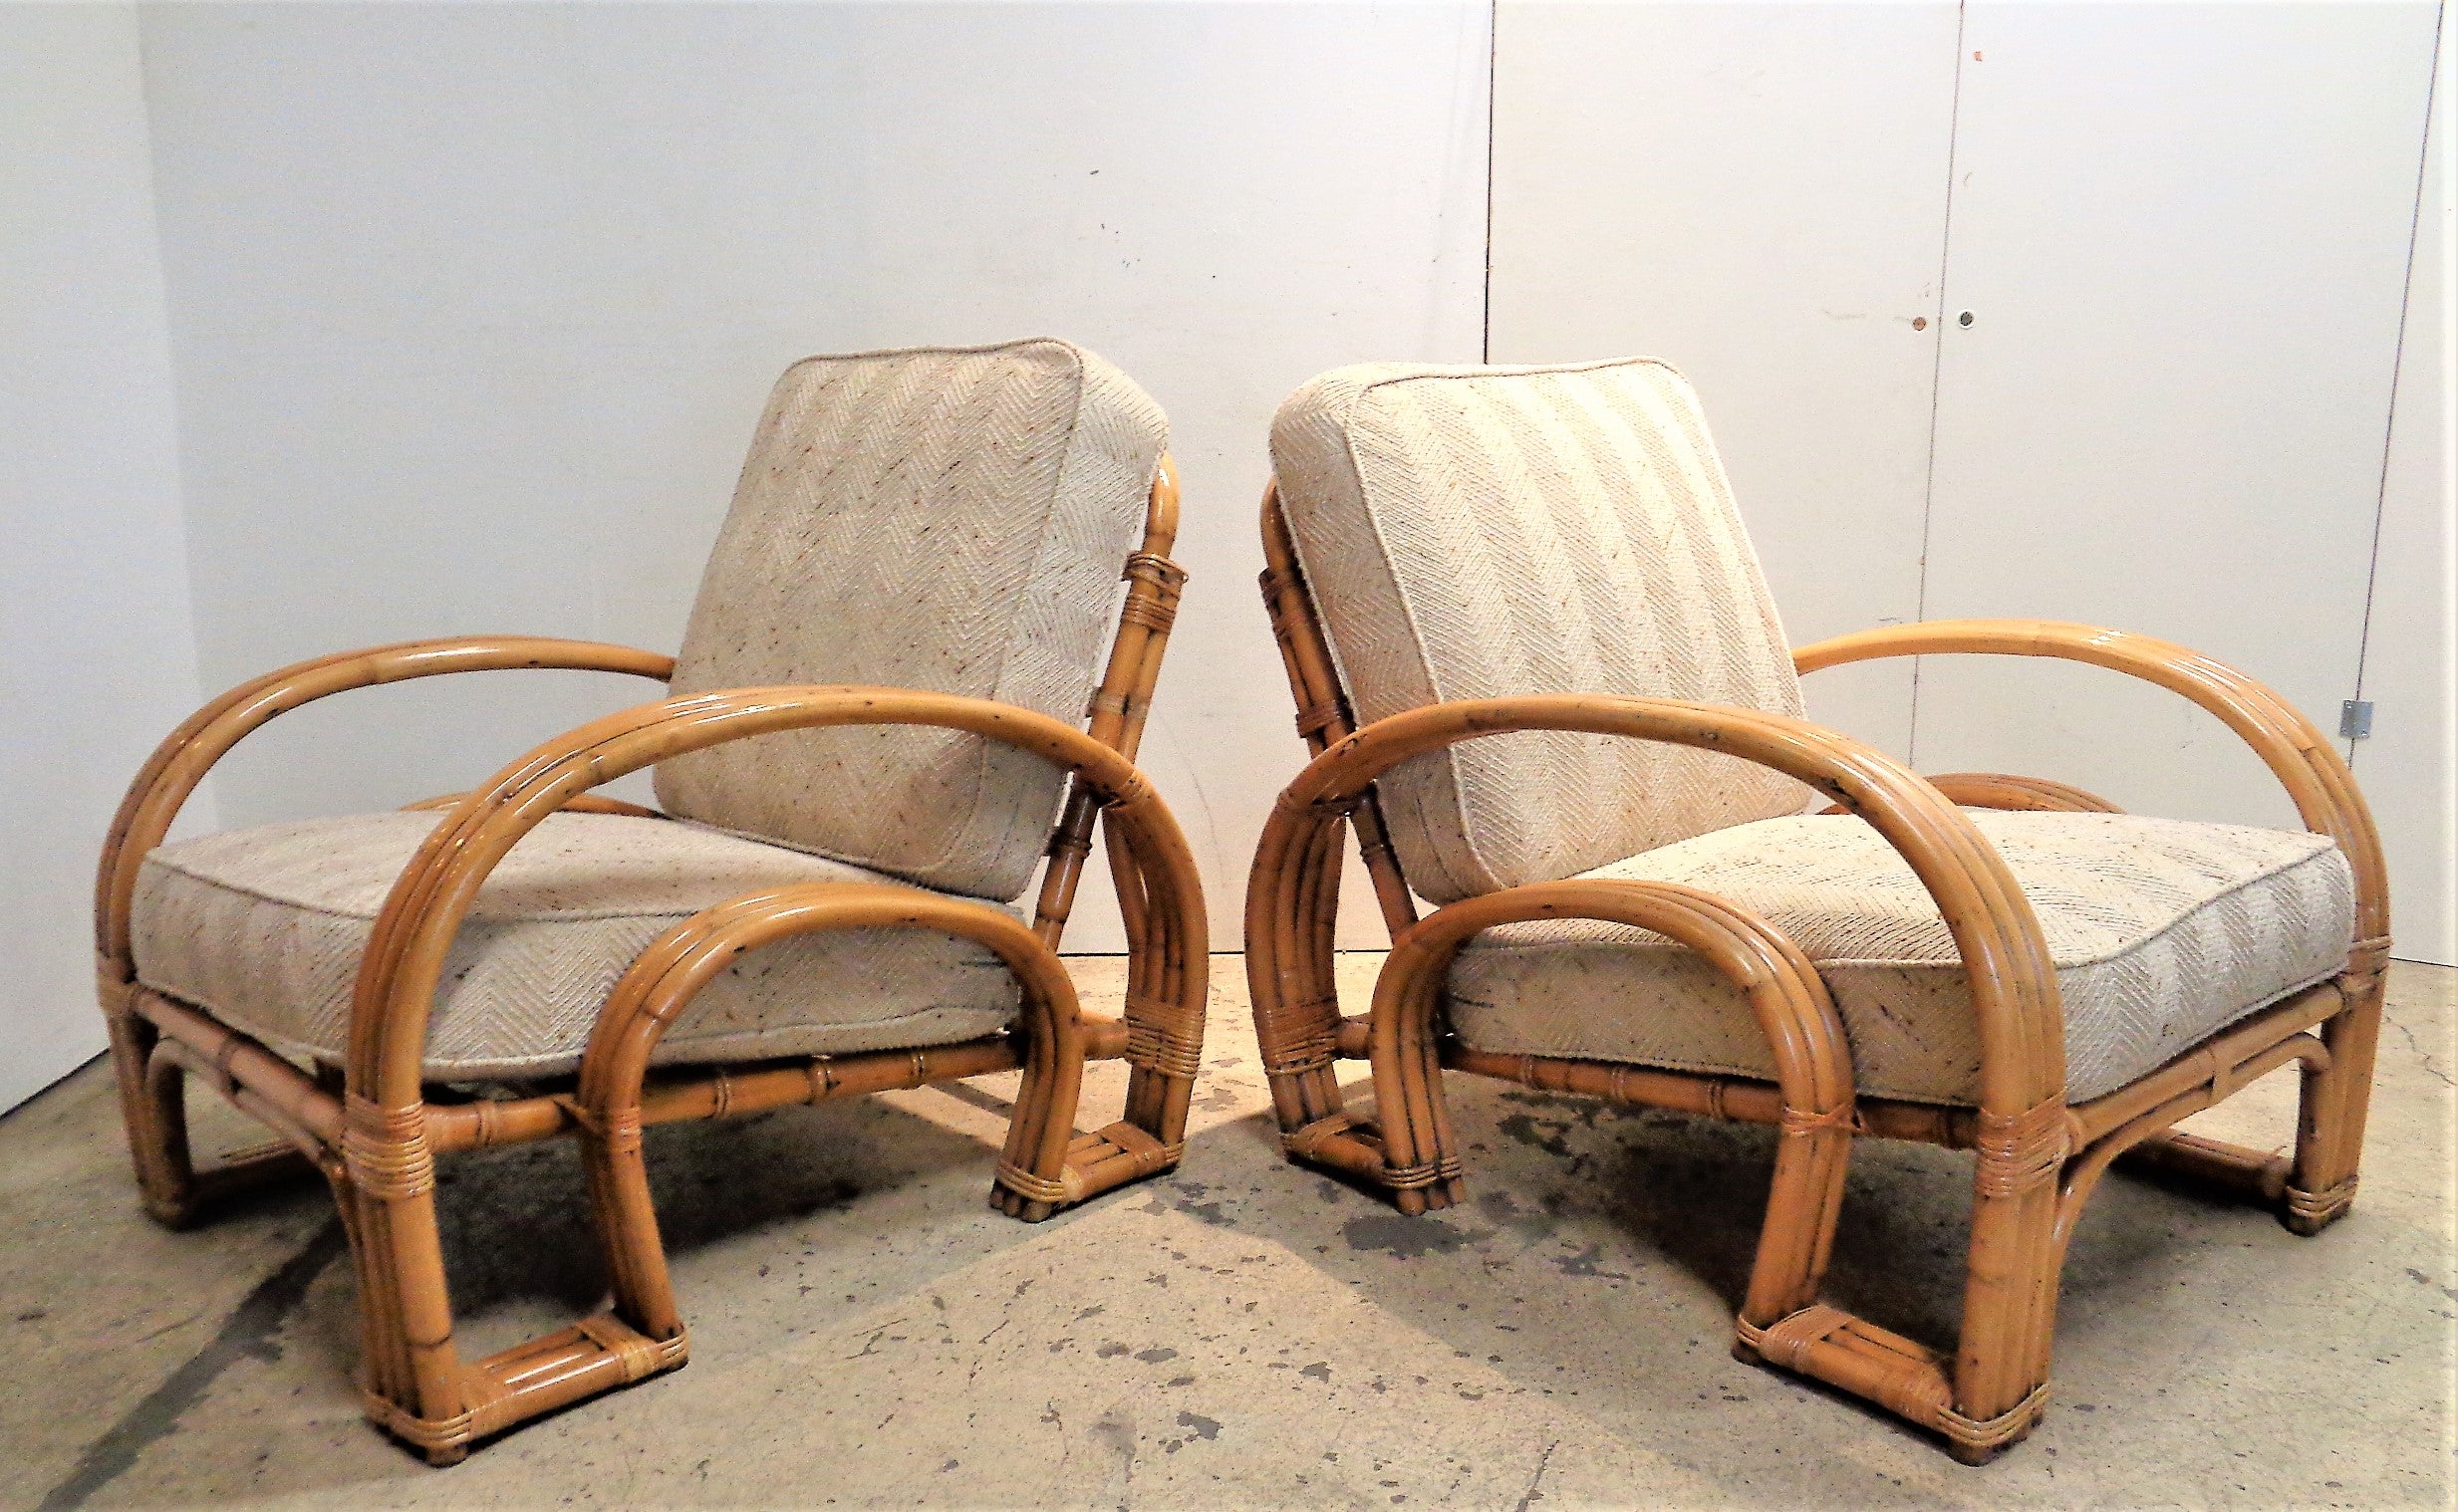  Rattan Double Horseshoe Lounge Stühle im Zustand „Gut“ im Angebot in Rochester, NY